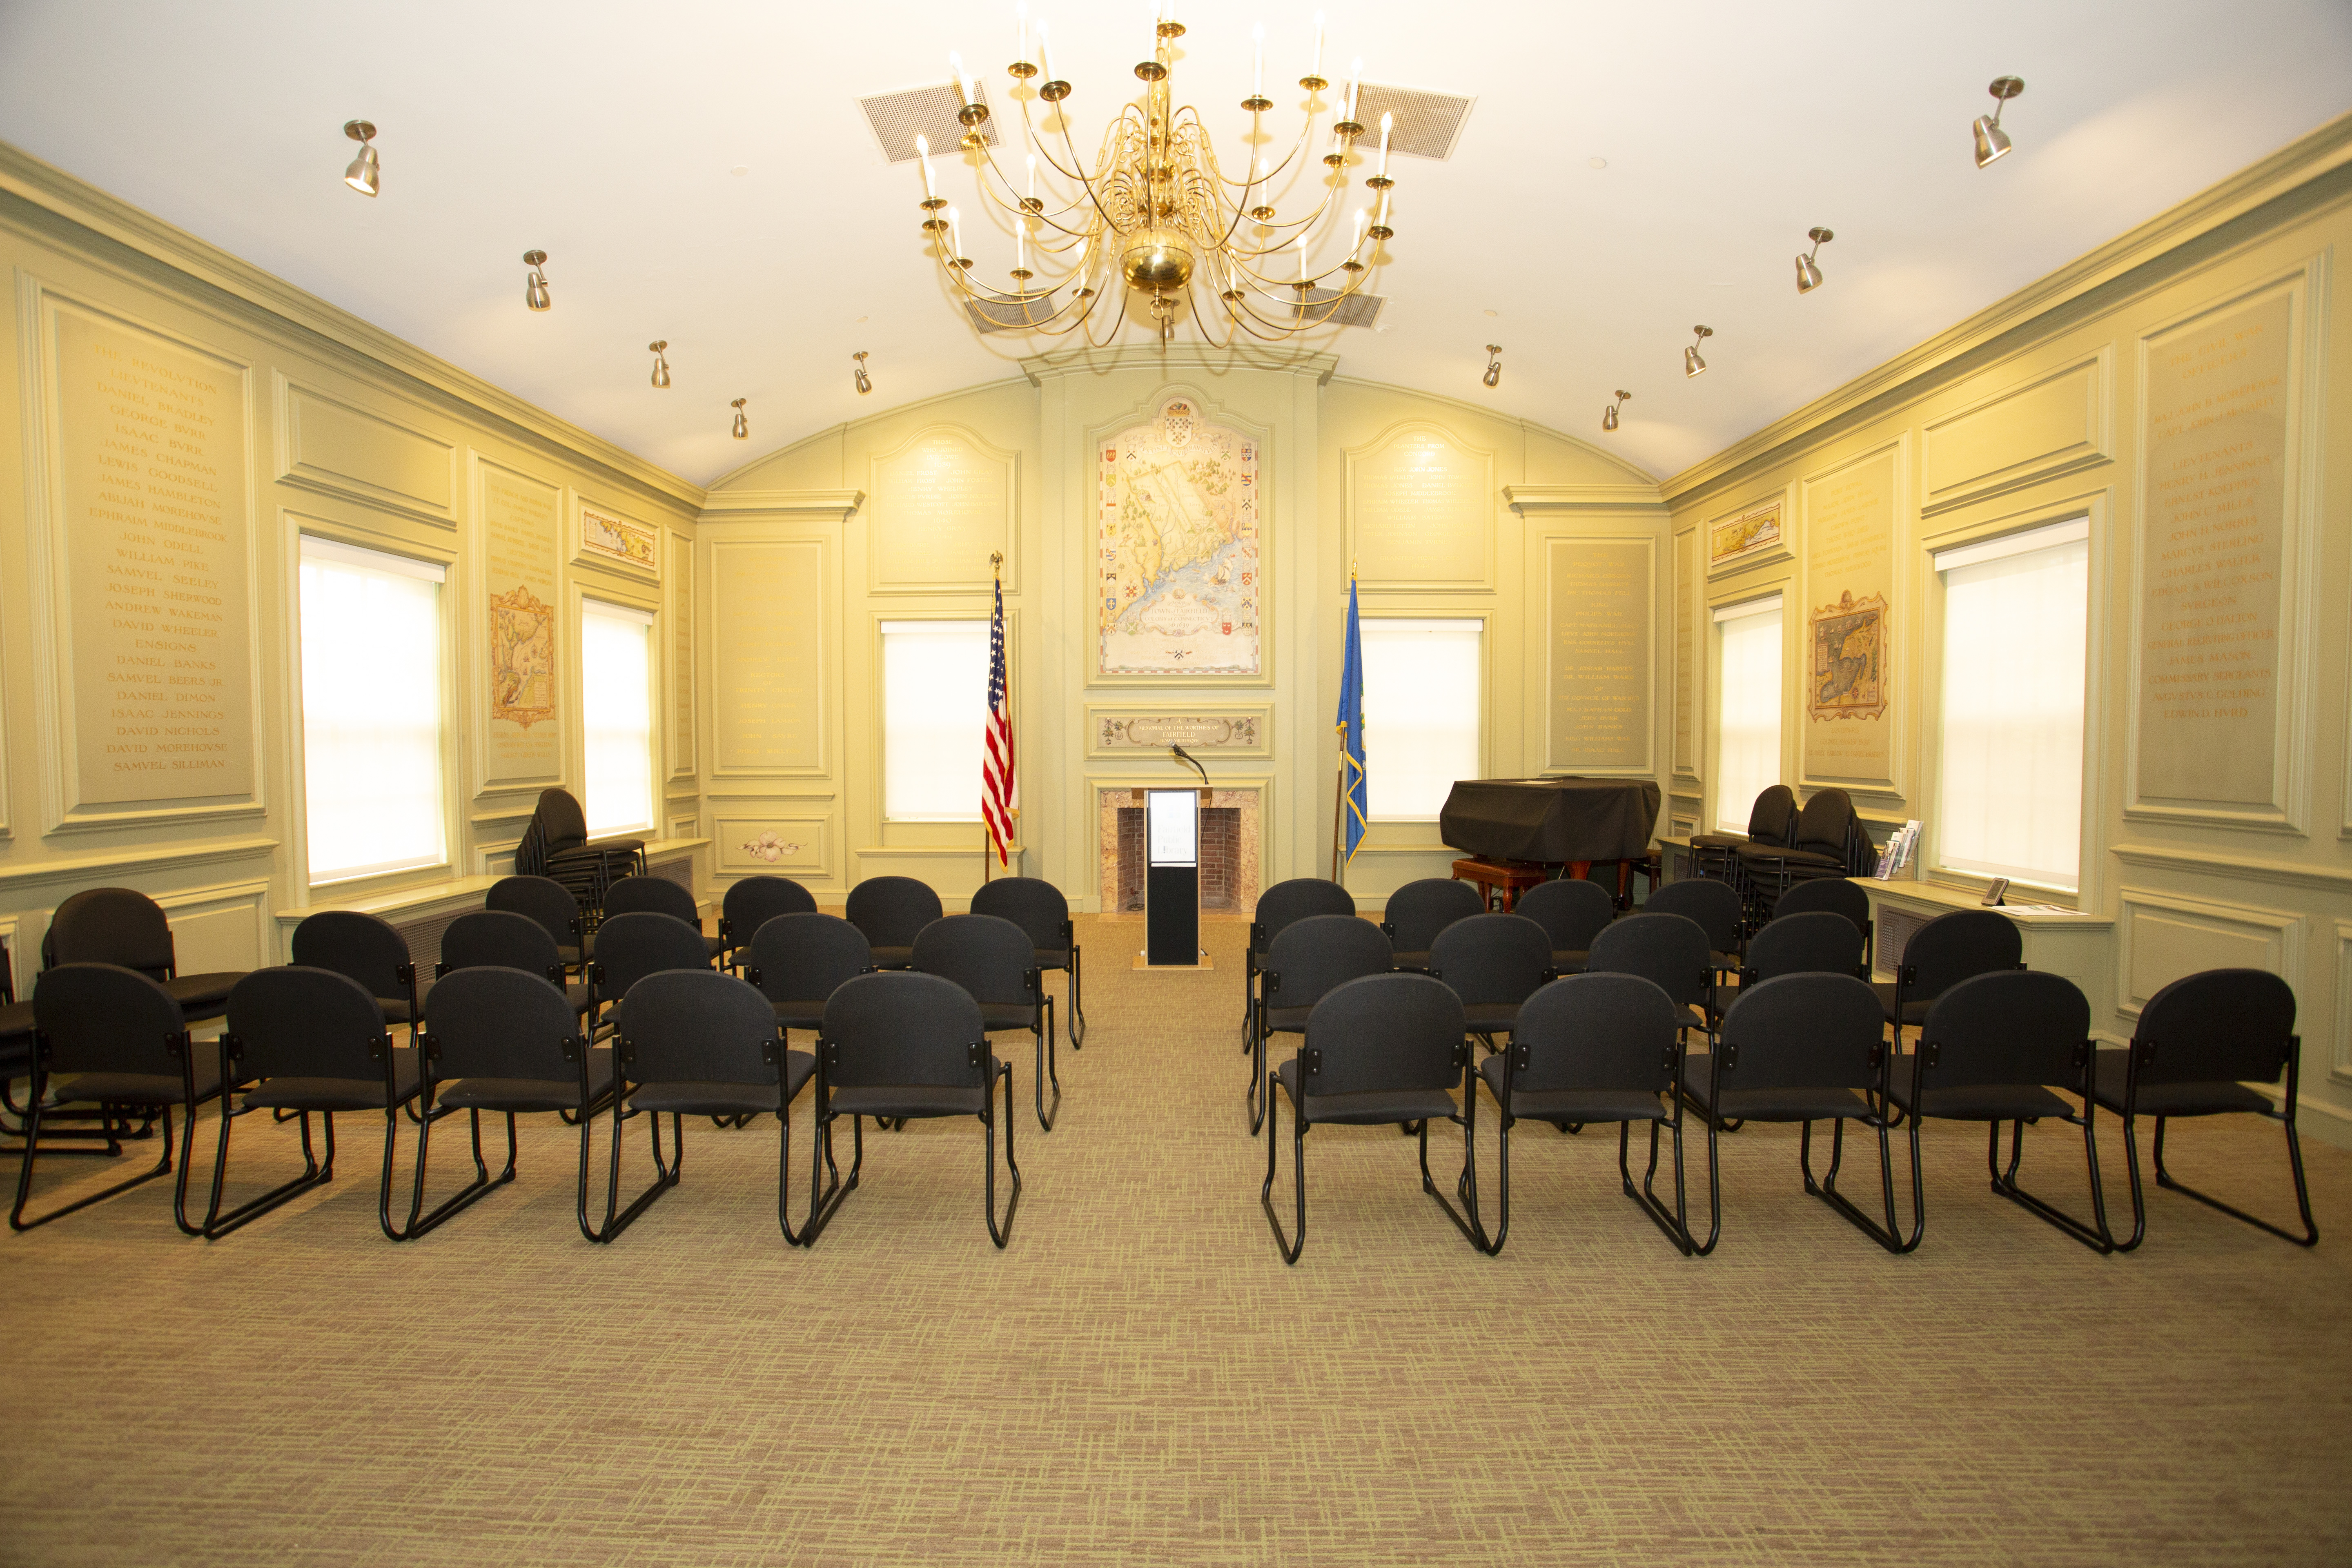 Memorial Room with chairs placed theater-style and lectern at front